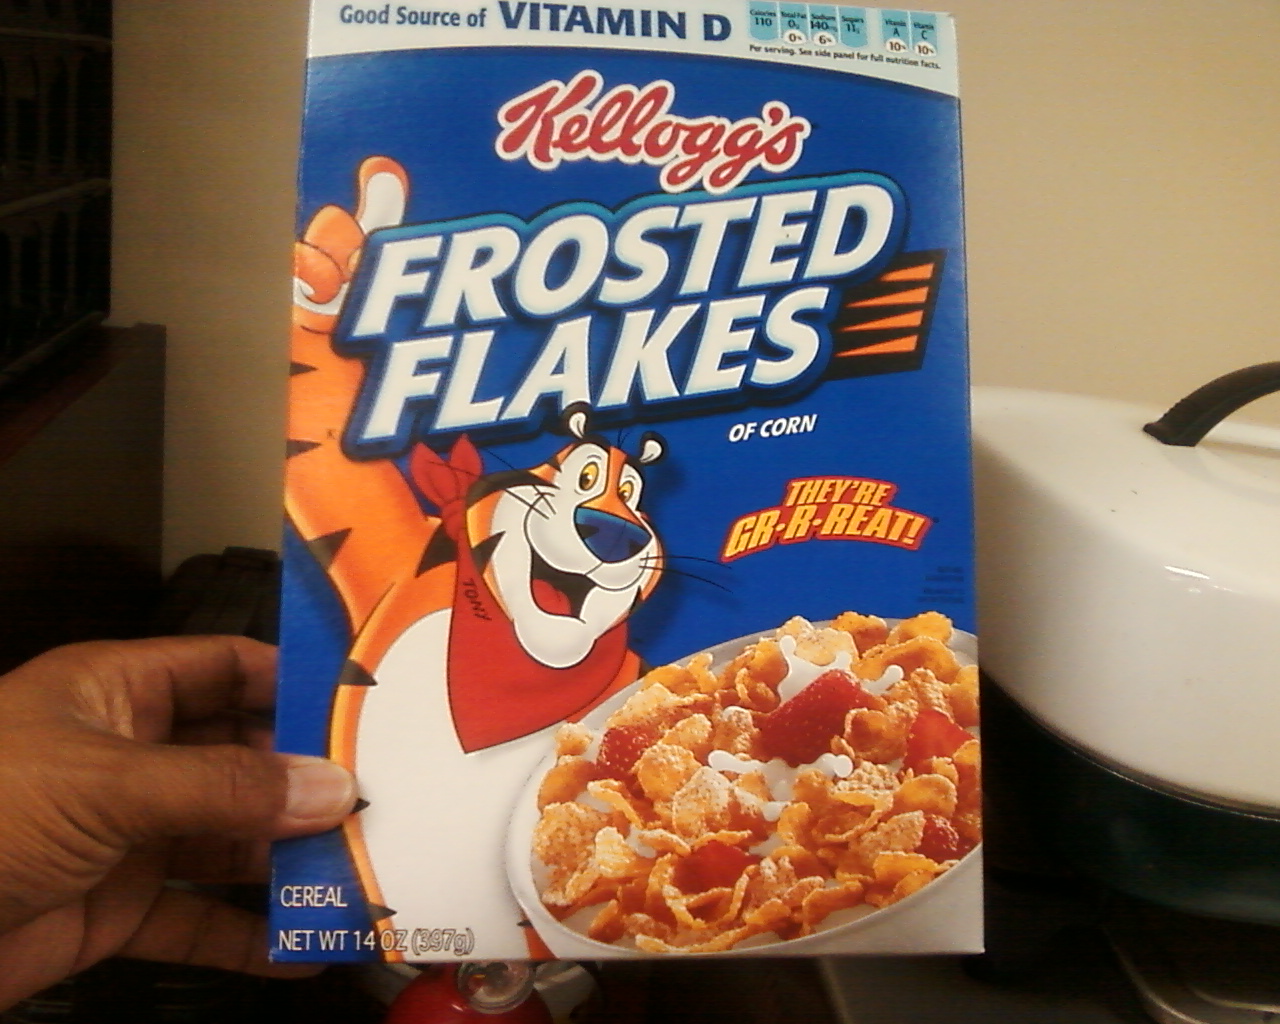 Maui-Kellogs Frosted Flakes My Favorite Even Now.